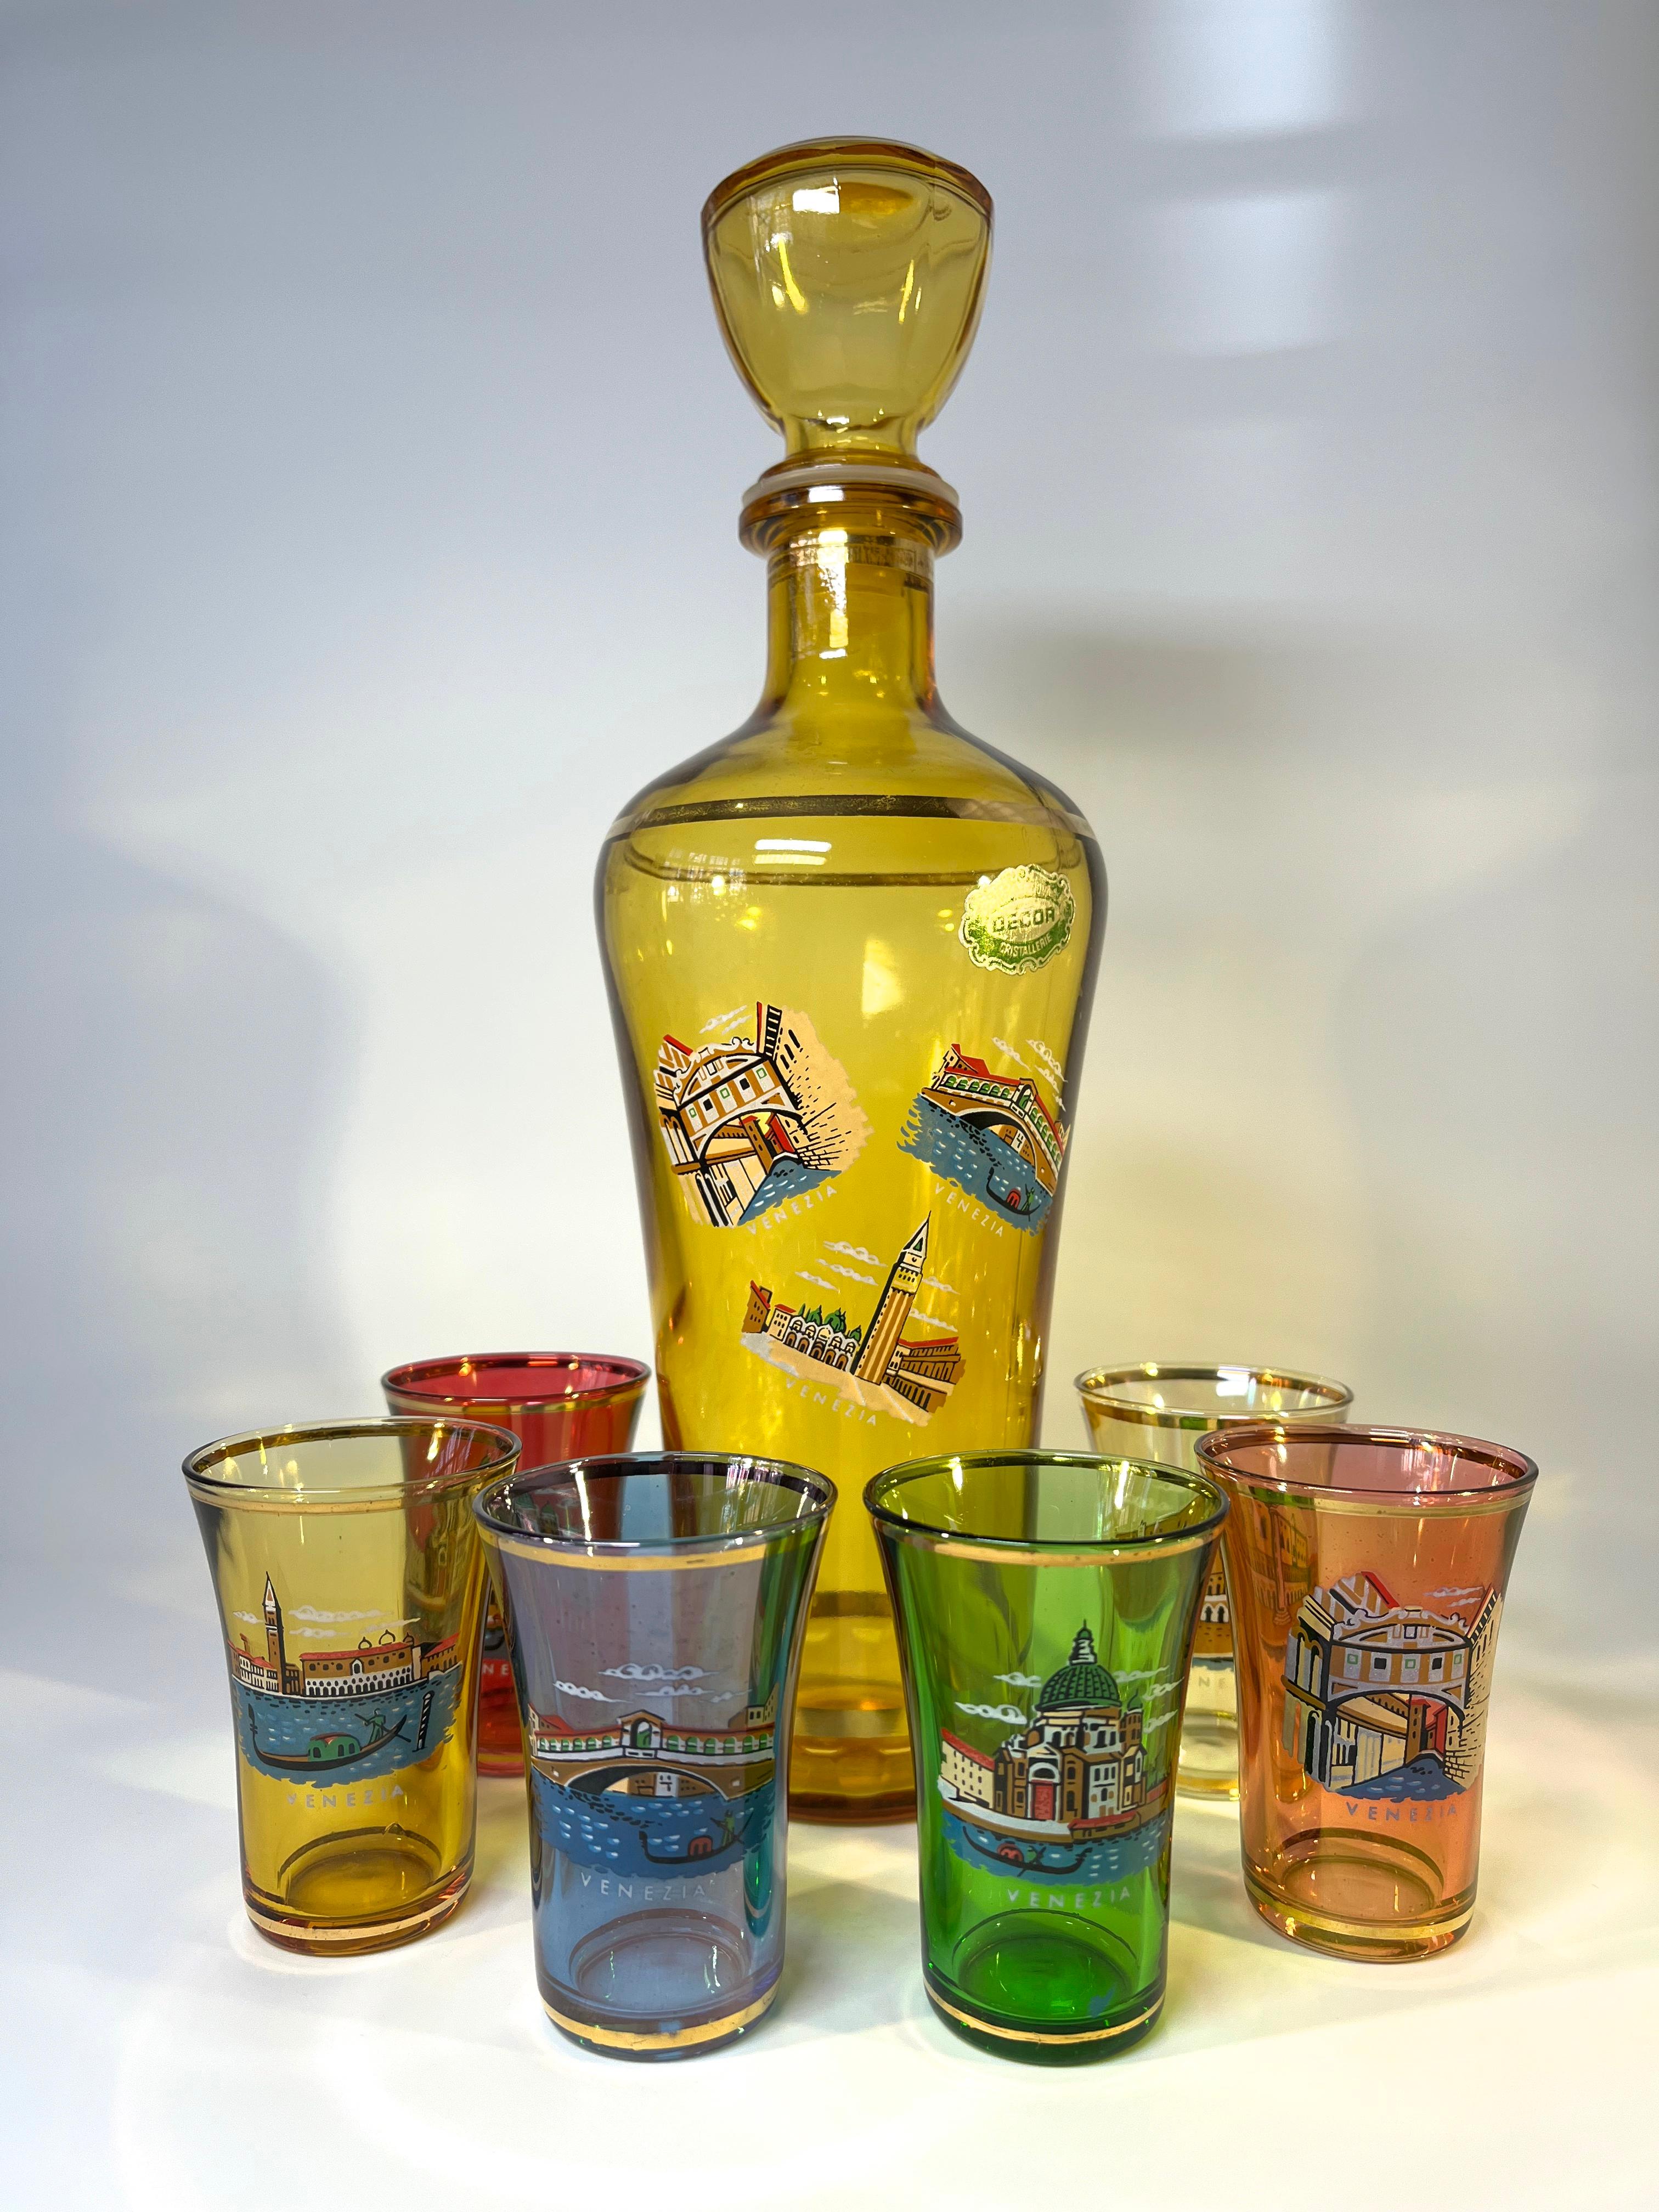 Nostalgic glass decanter and six glasses depicting the famous sights of Venice
Fabulously retro and kitsch - a collectors piece
Amber coloured decanter with enamel scenes of Venice, complete with plastic stopper of the era.  
Six Venetian scenes